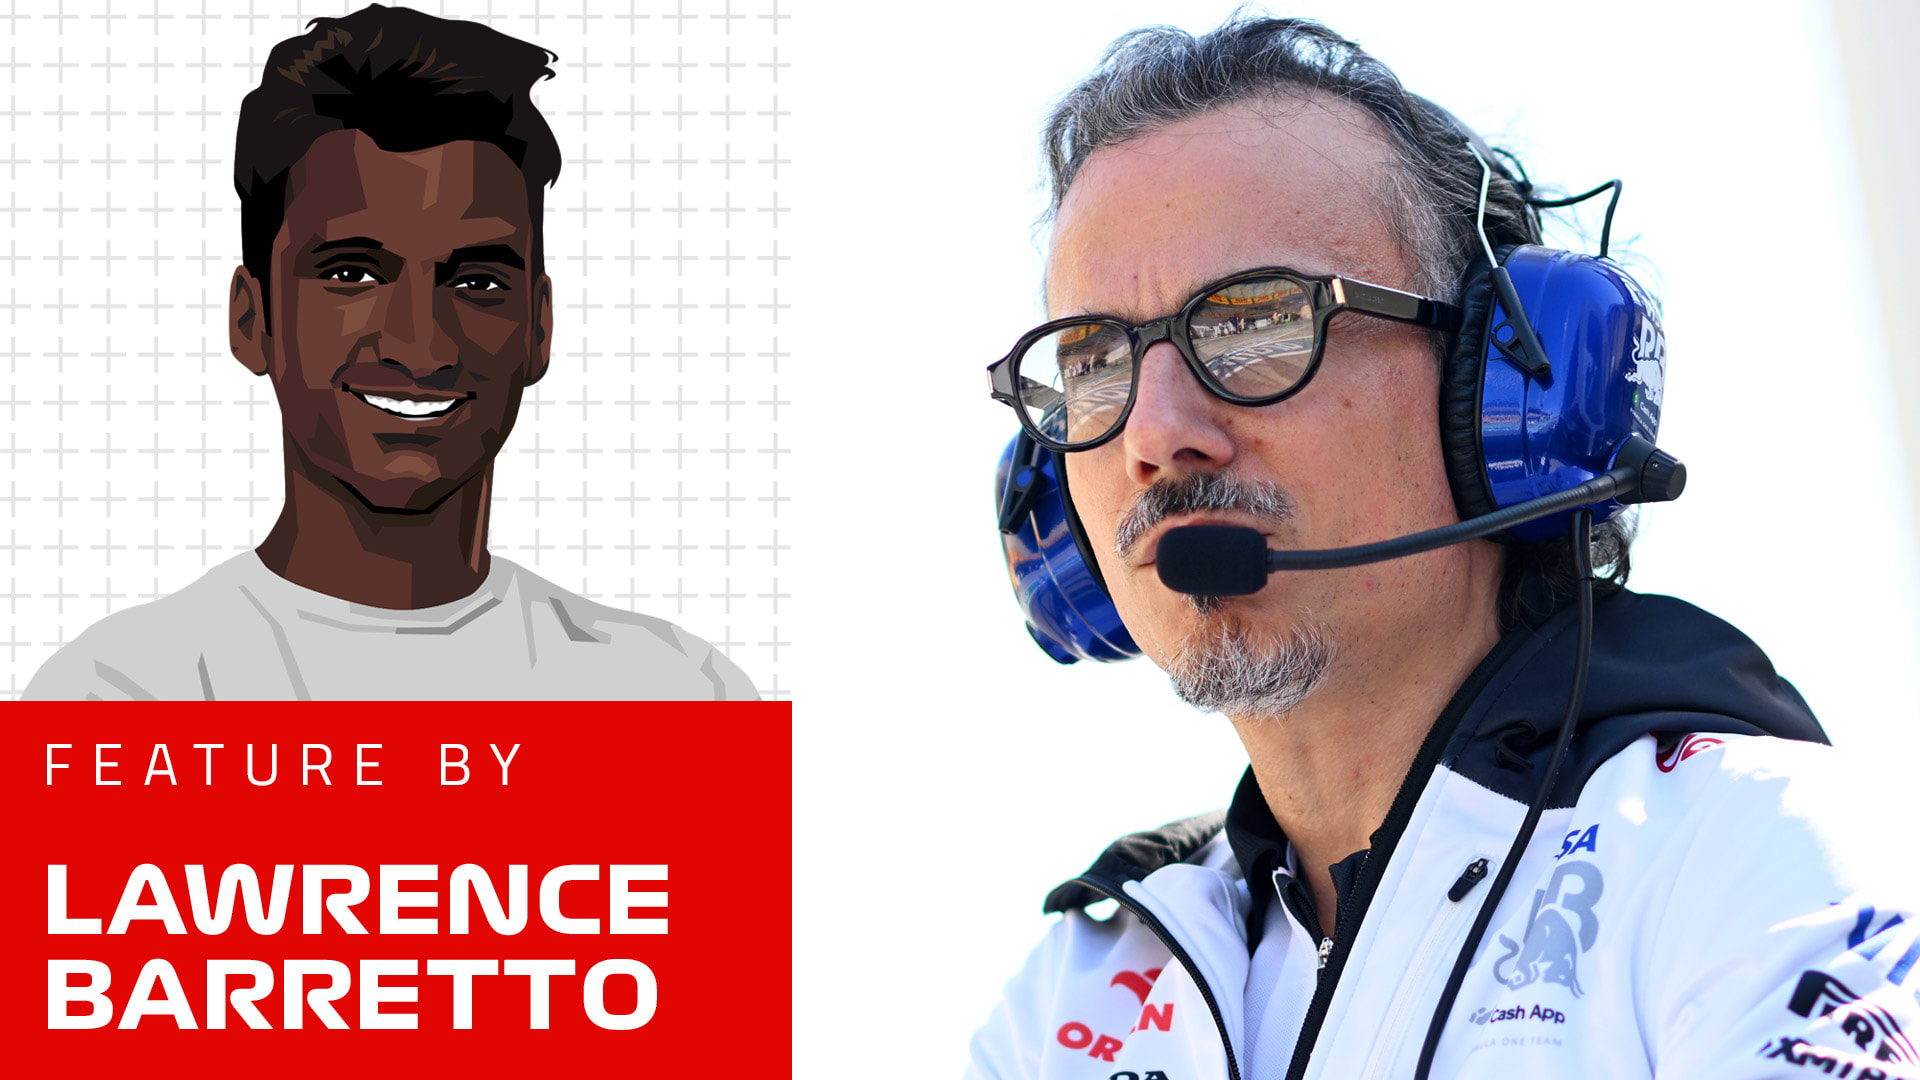 BARRETTO: How Laurent Mekies has got RB firing on all cylinders in his first year as an F1 team boss